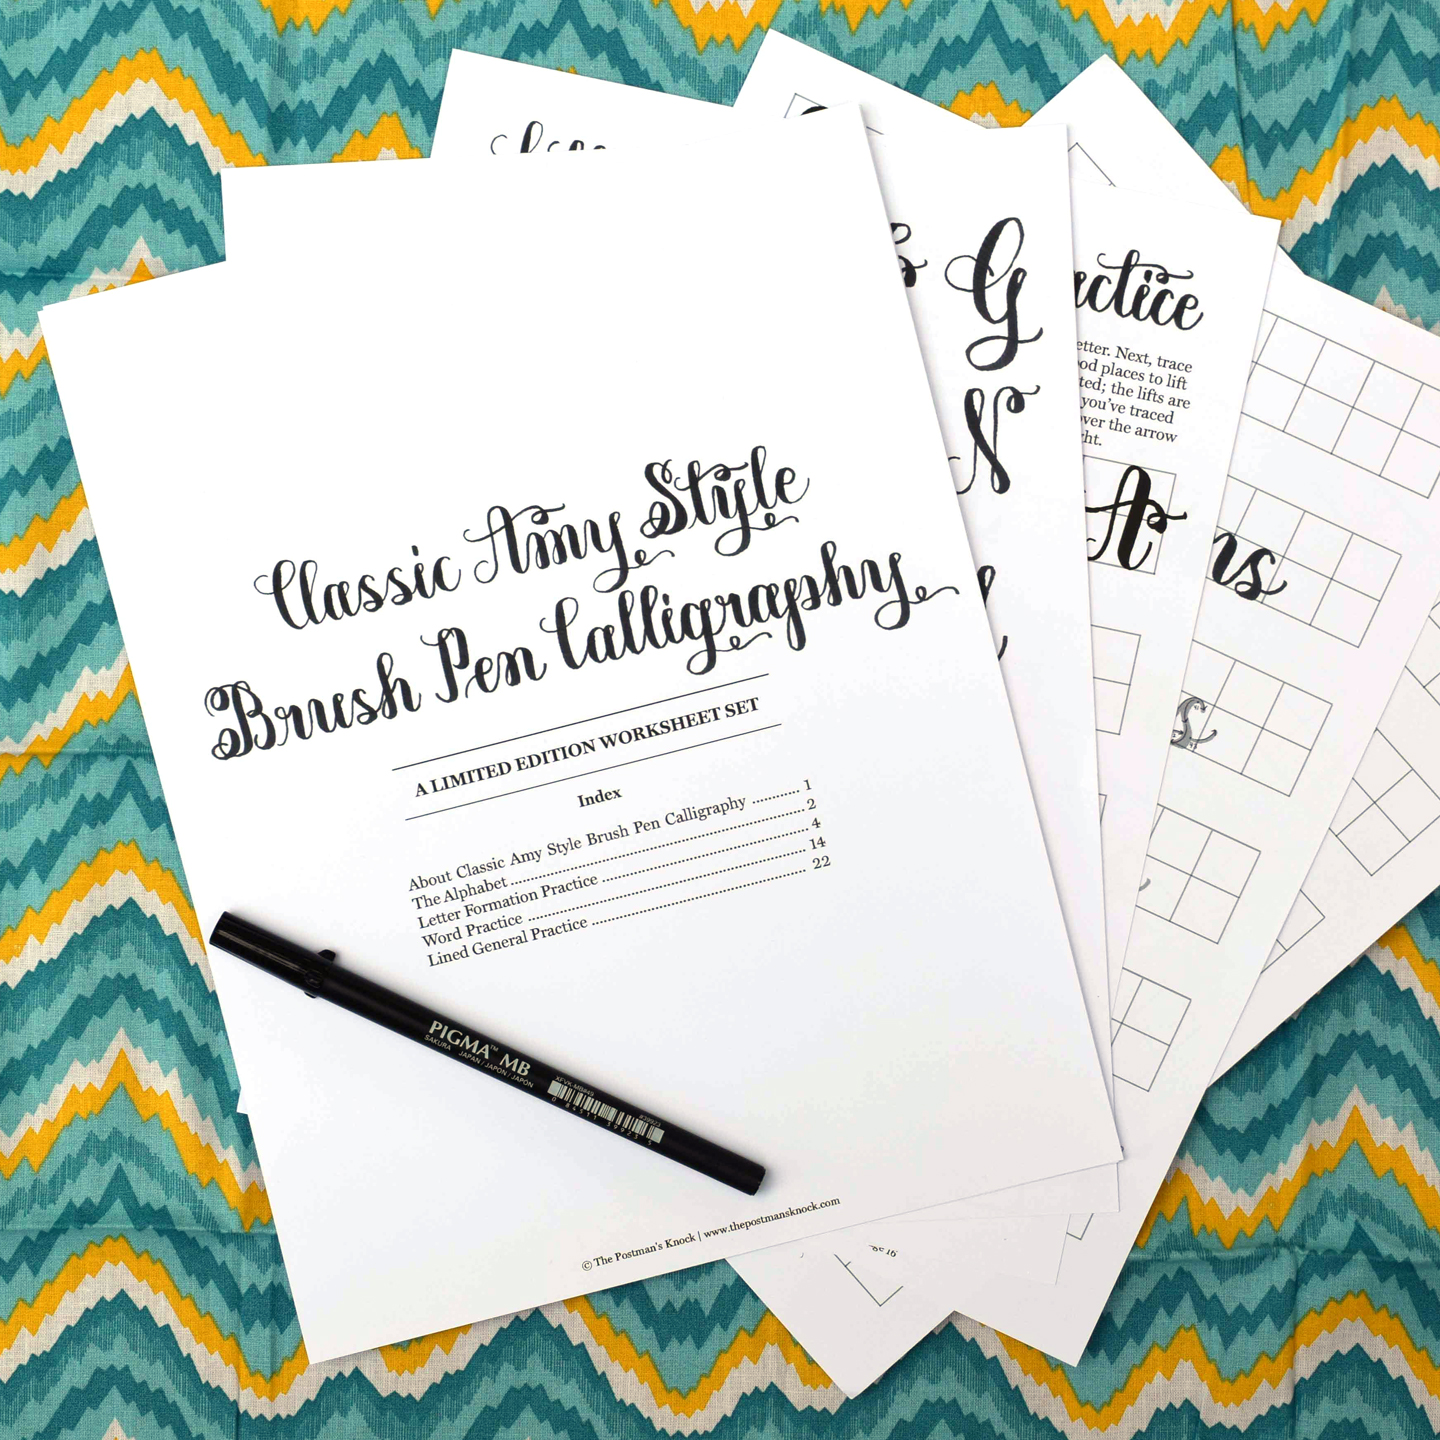 Classic Amy Style BRUSH PEN Calligraphy Worksheet: Limited Edition